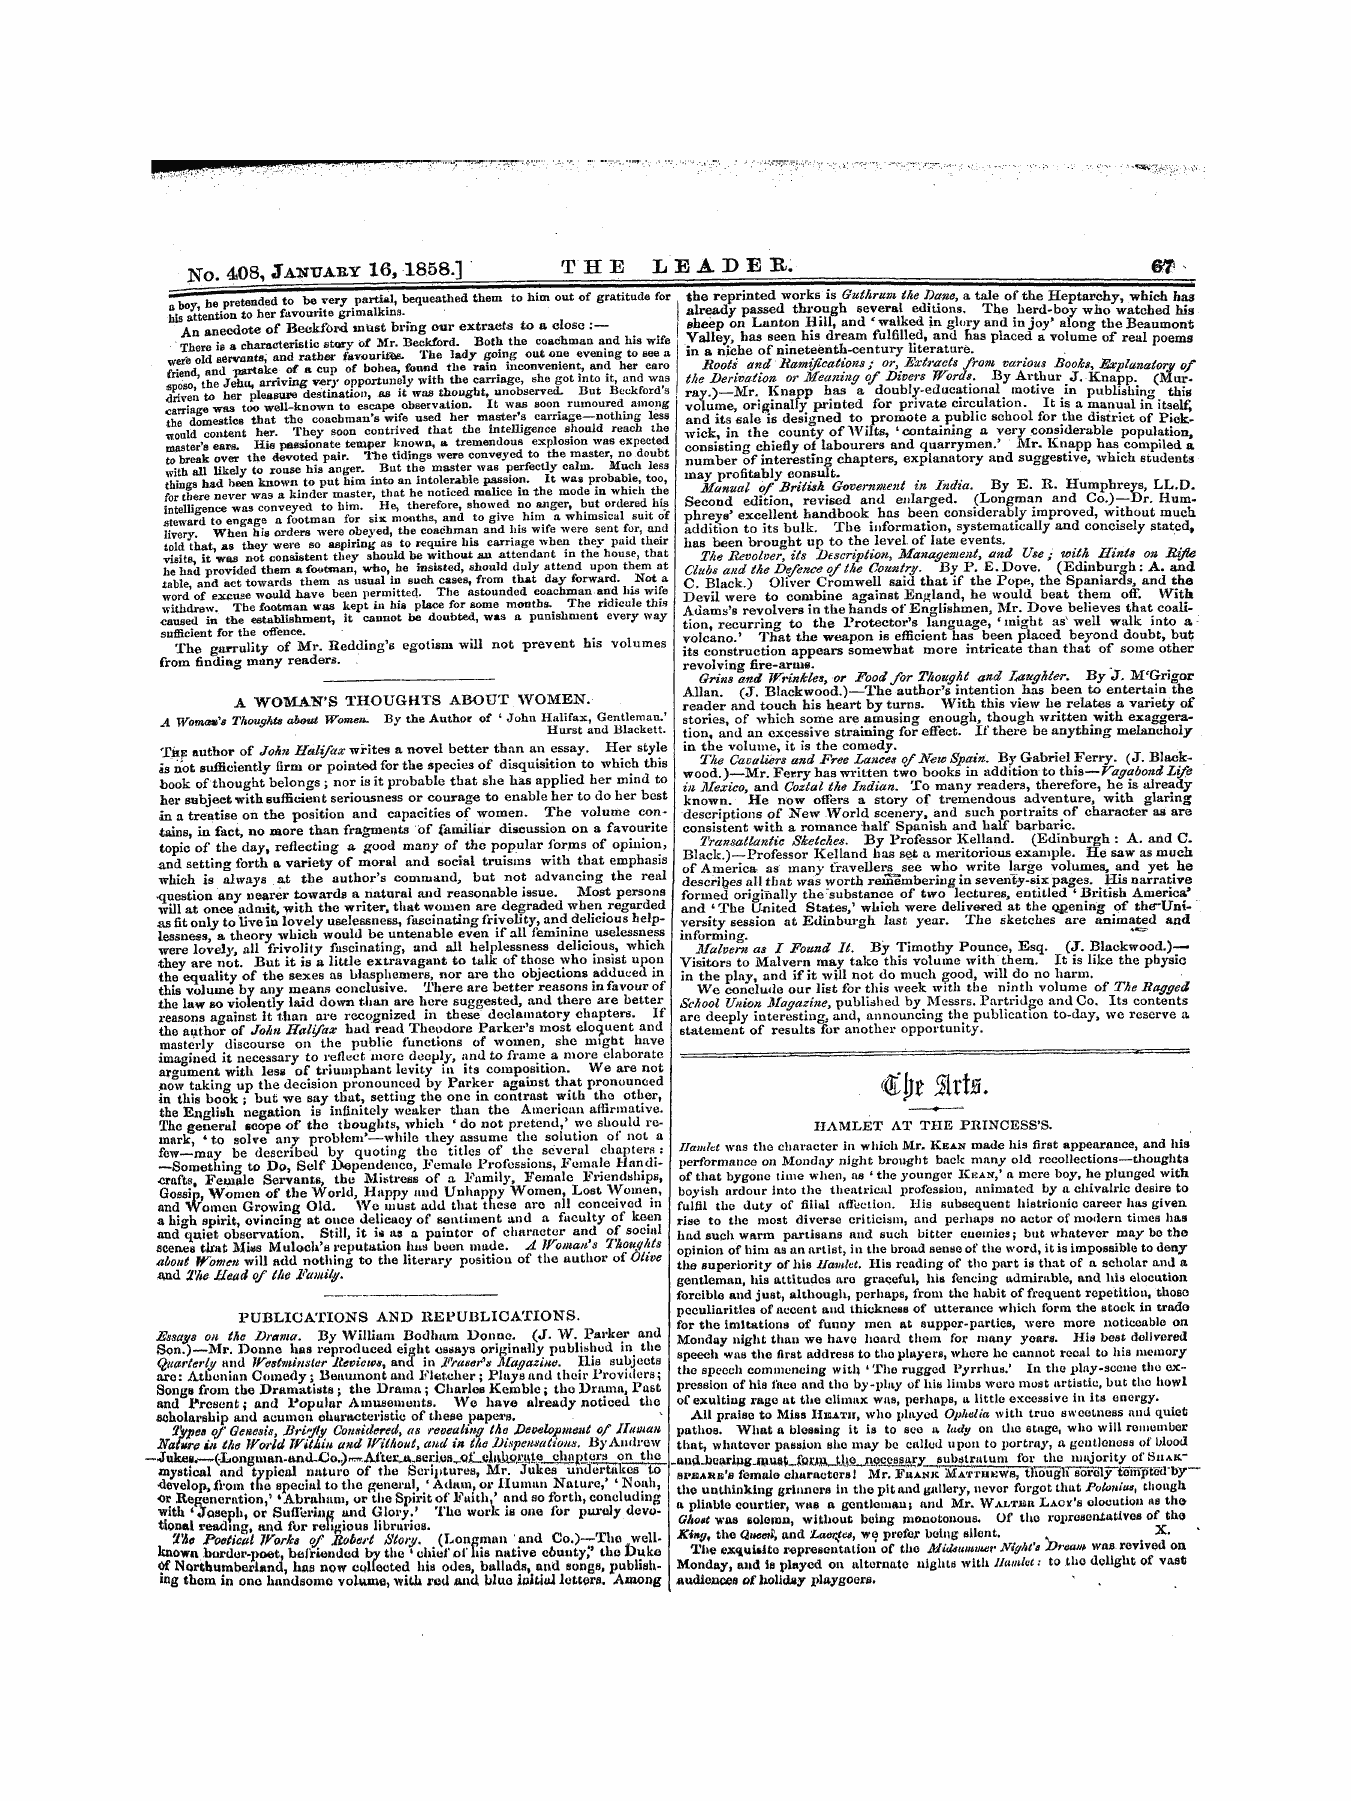 Leader (1850-1860): jS F Y, 1st edition: 19